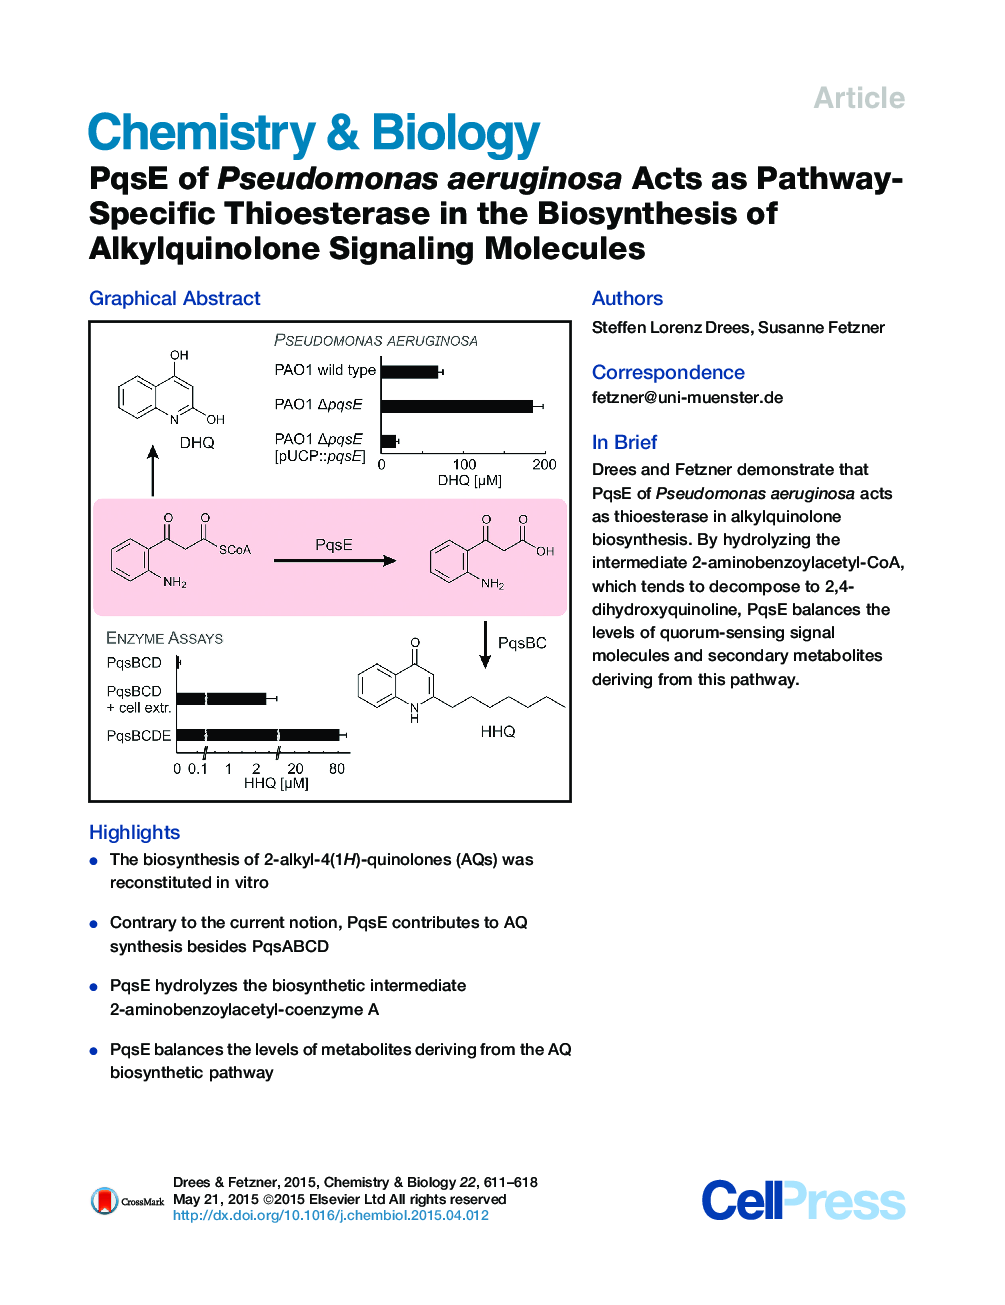 PqsE of Pseudomonas aeruginosa Acts as Pathway-Specific Thioesterase in the Biosynthesis of Alkylquinolone Signaling Molecules